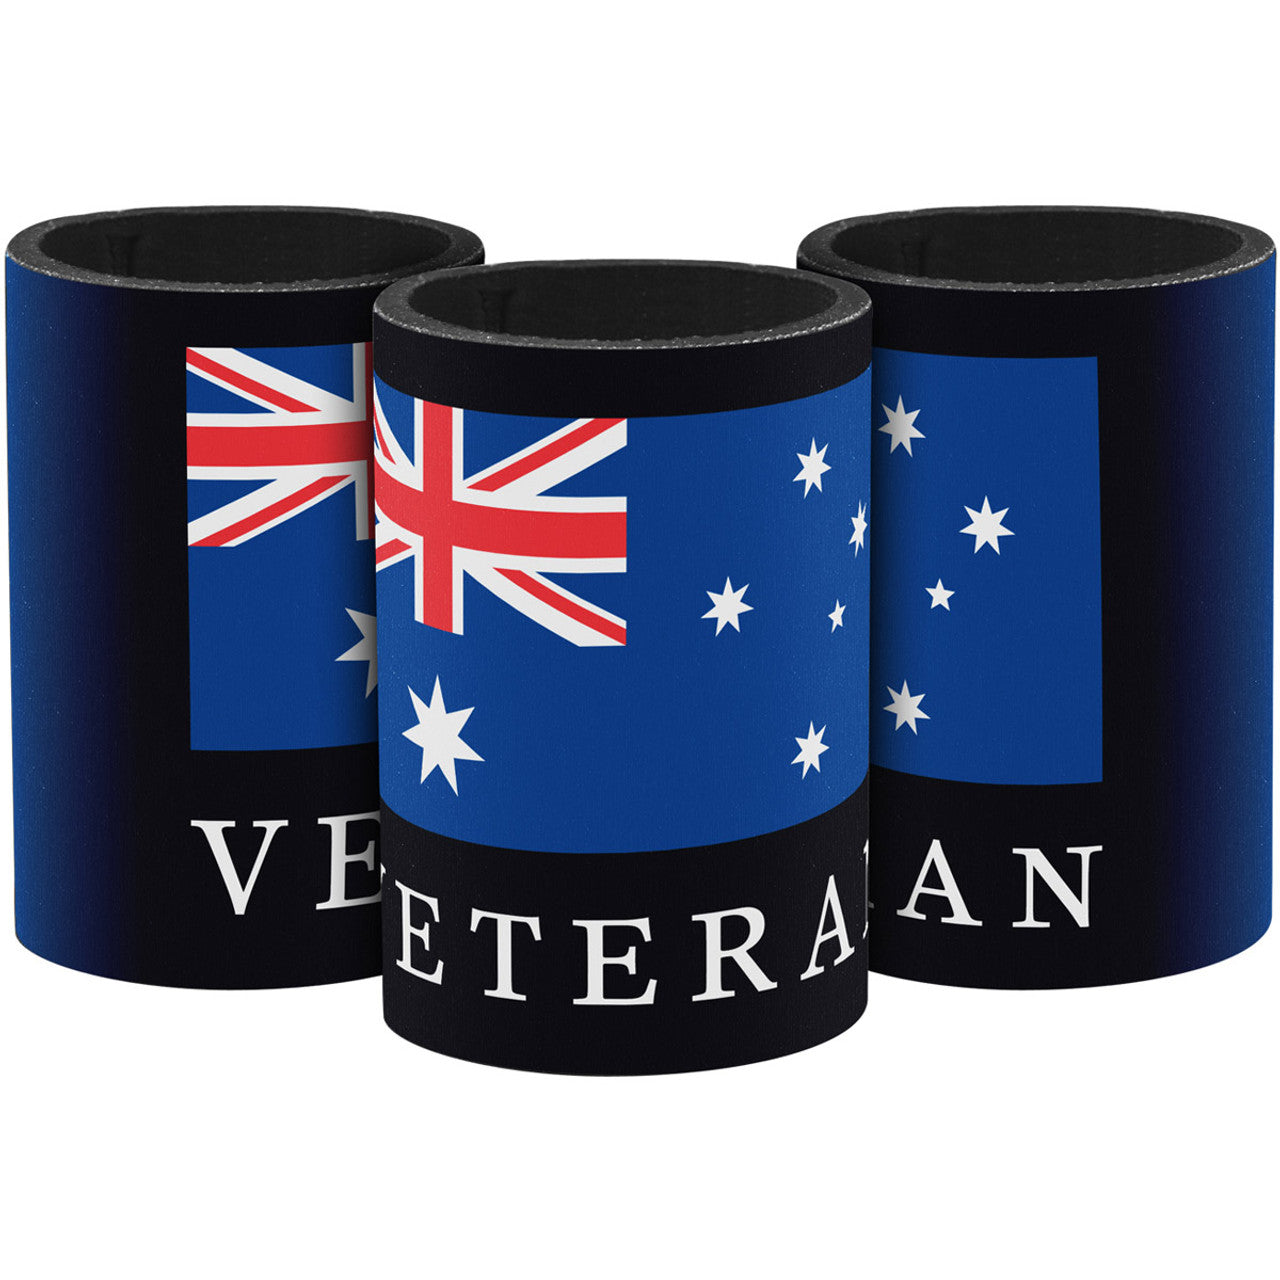 Those who have served share the memories of mateship. They remember the good times and they understand the hardships of life in the military. In our veterans we see courage sacrifice and dedication to country. With service you have earned a nation's respect and gratitude. Share and use this drink cooler with a pride only a veteran will fully appreciate.